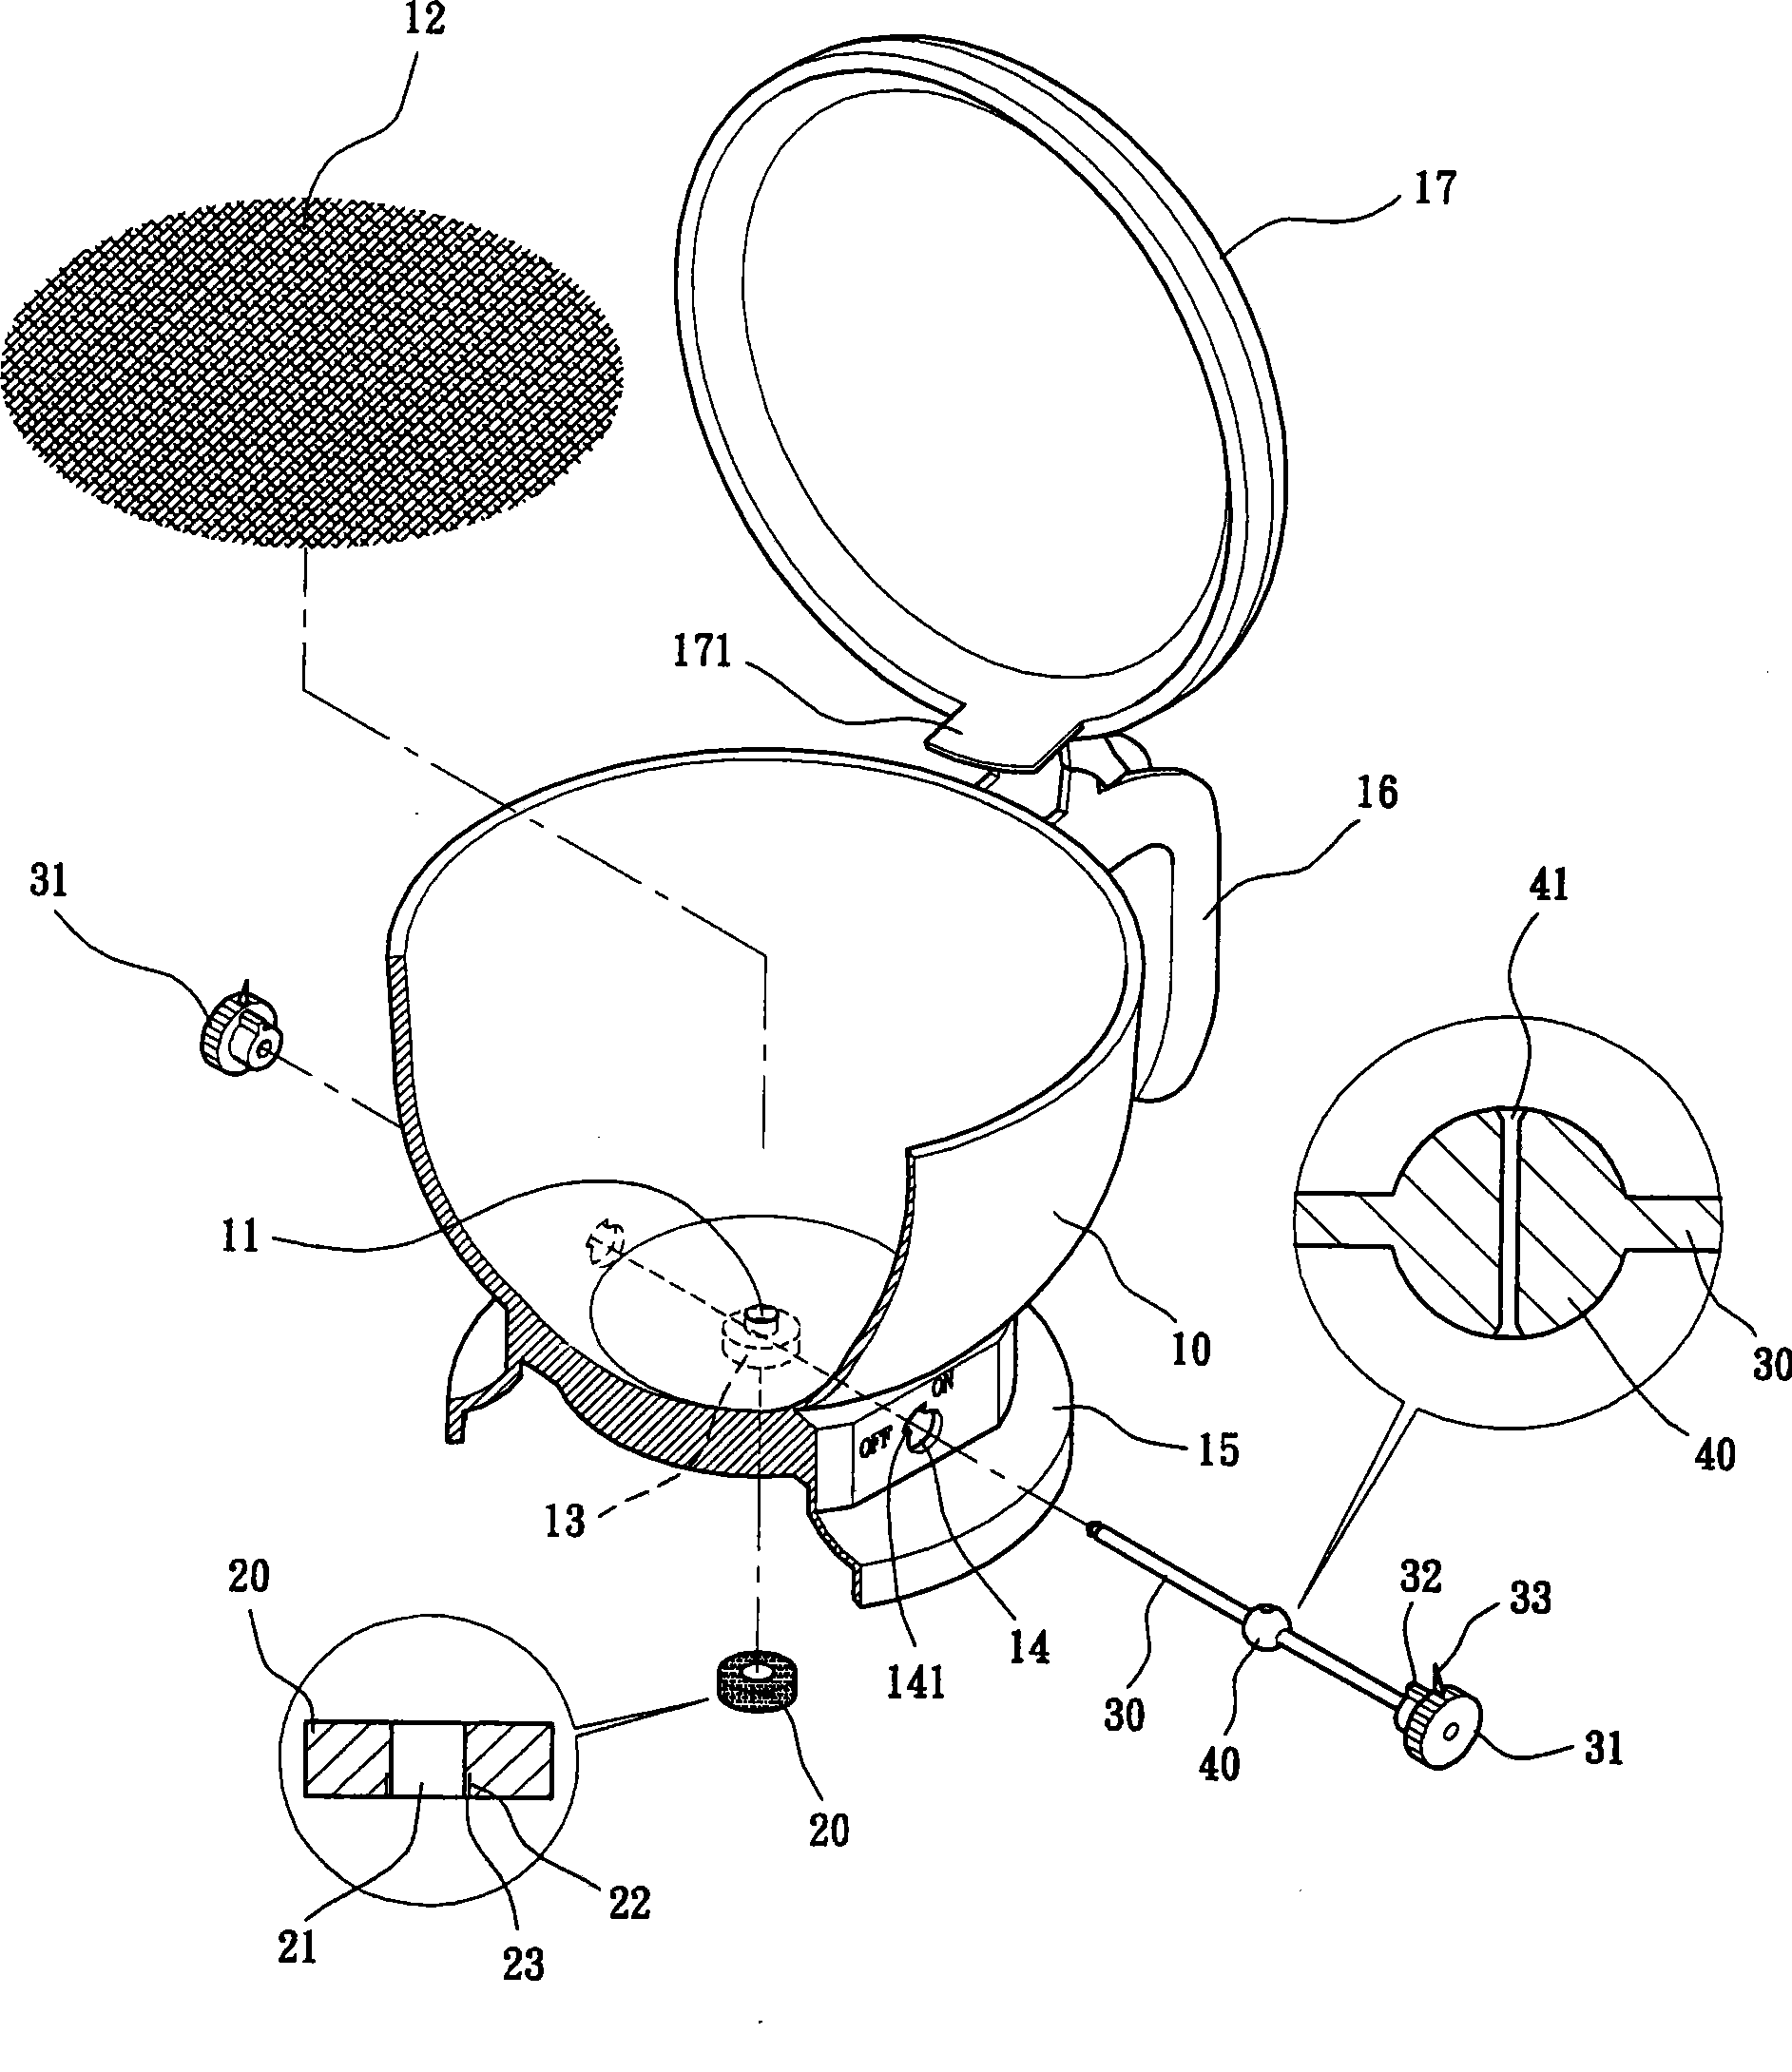 Method for preventing dripping and leaking and employed structure thereof